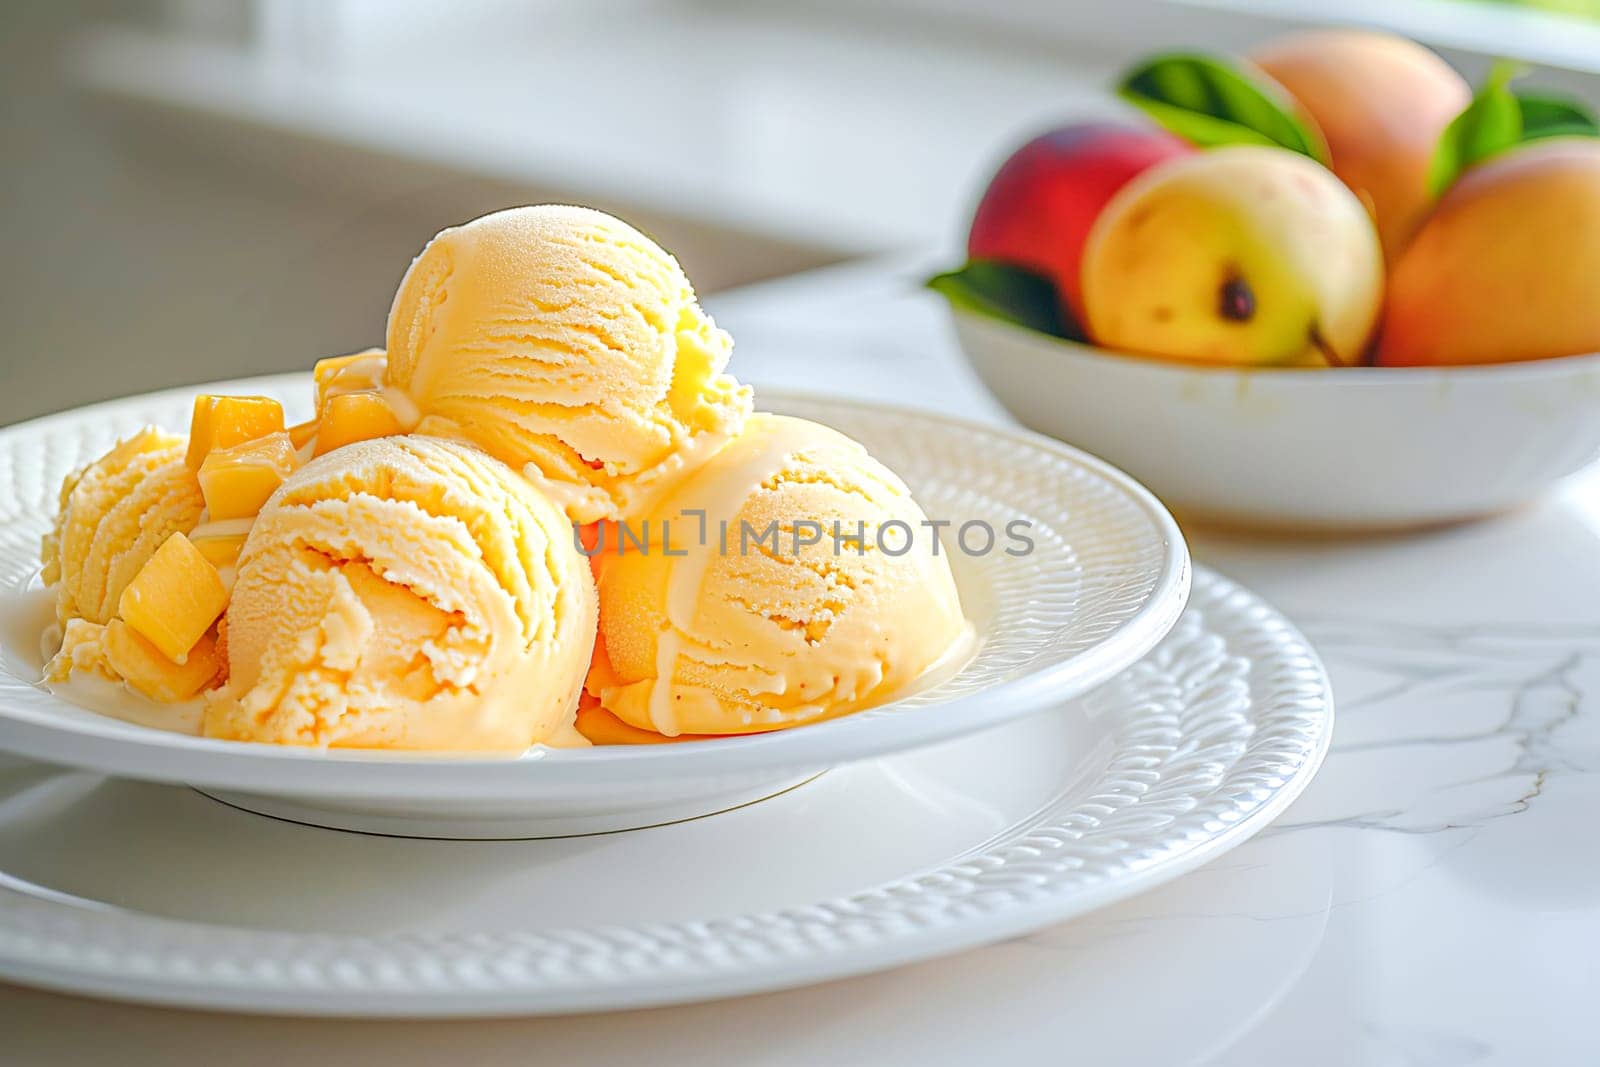 Balls of delicious mango ice cream lie in a white bowl on a table with a marble surface.